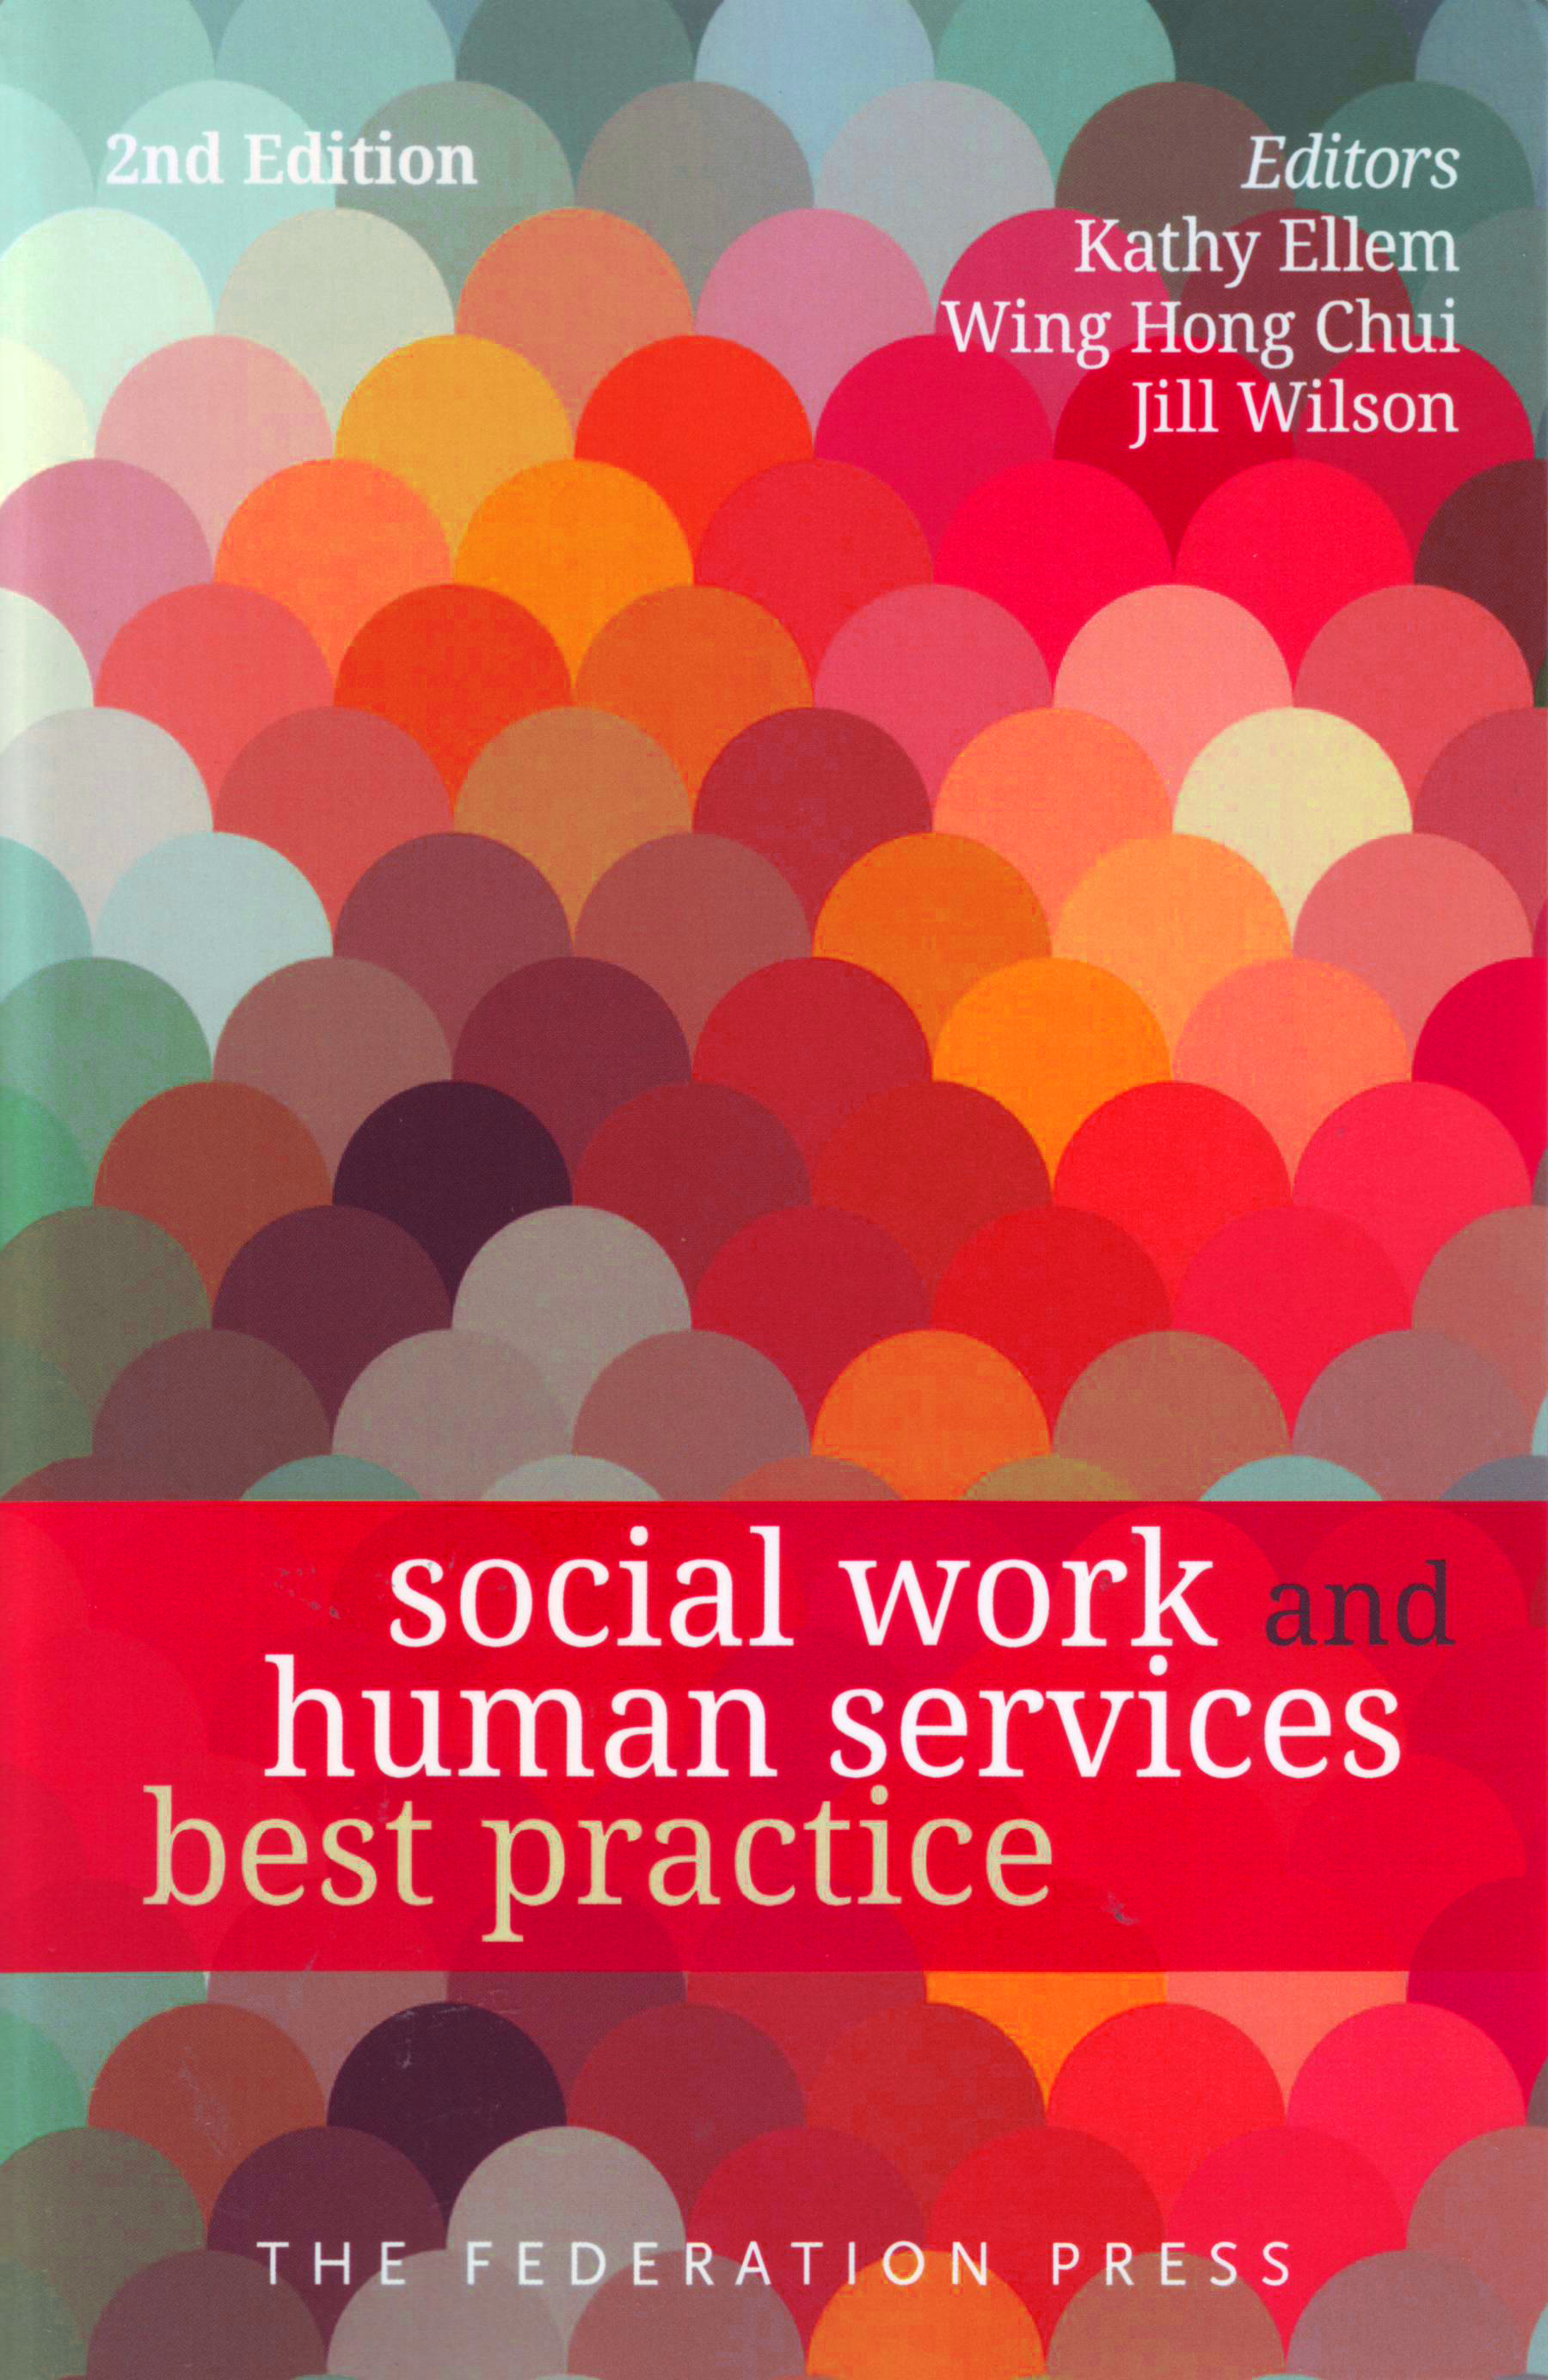 Social Work and Human Services Best Practice e2